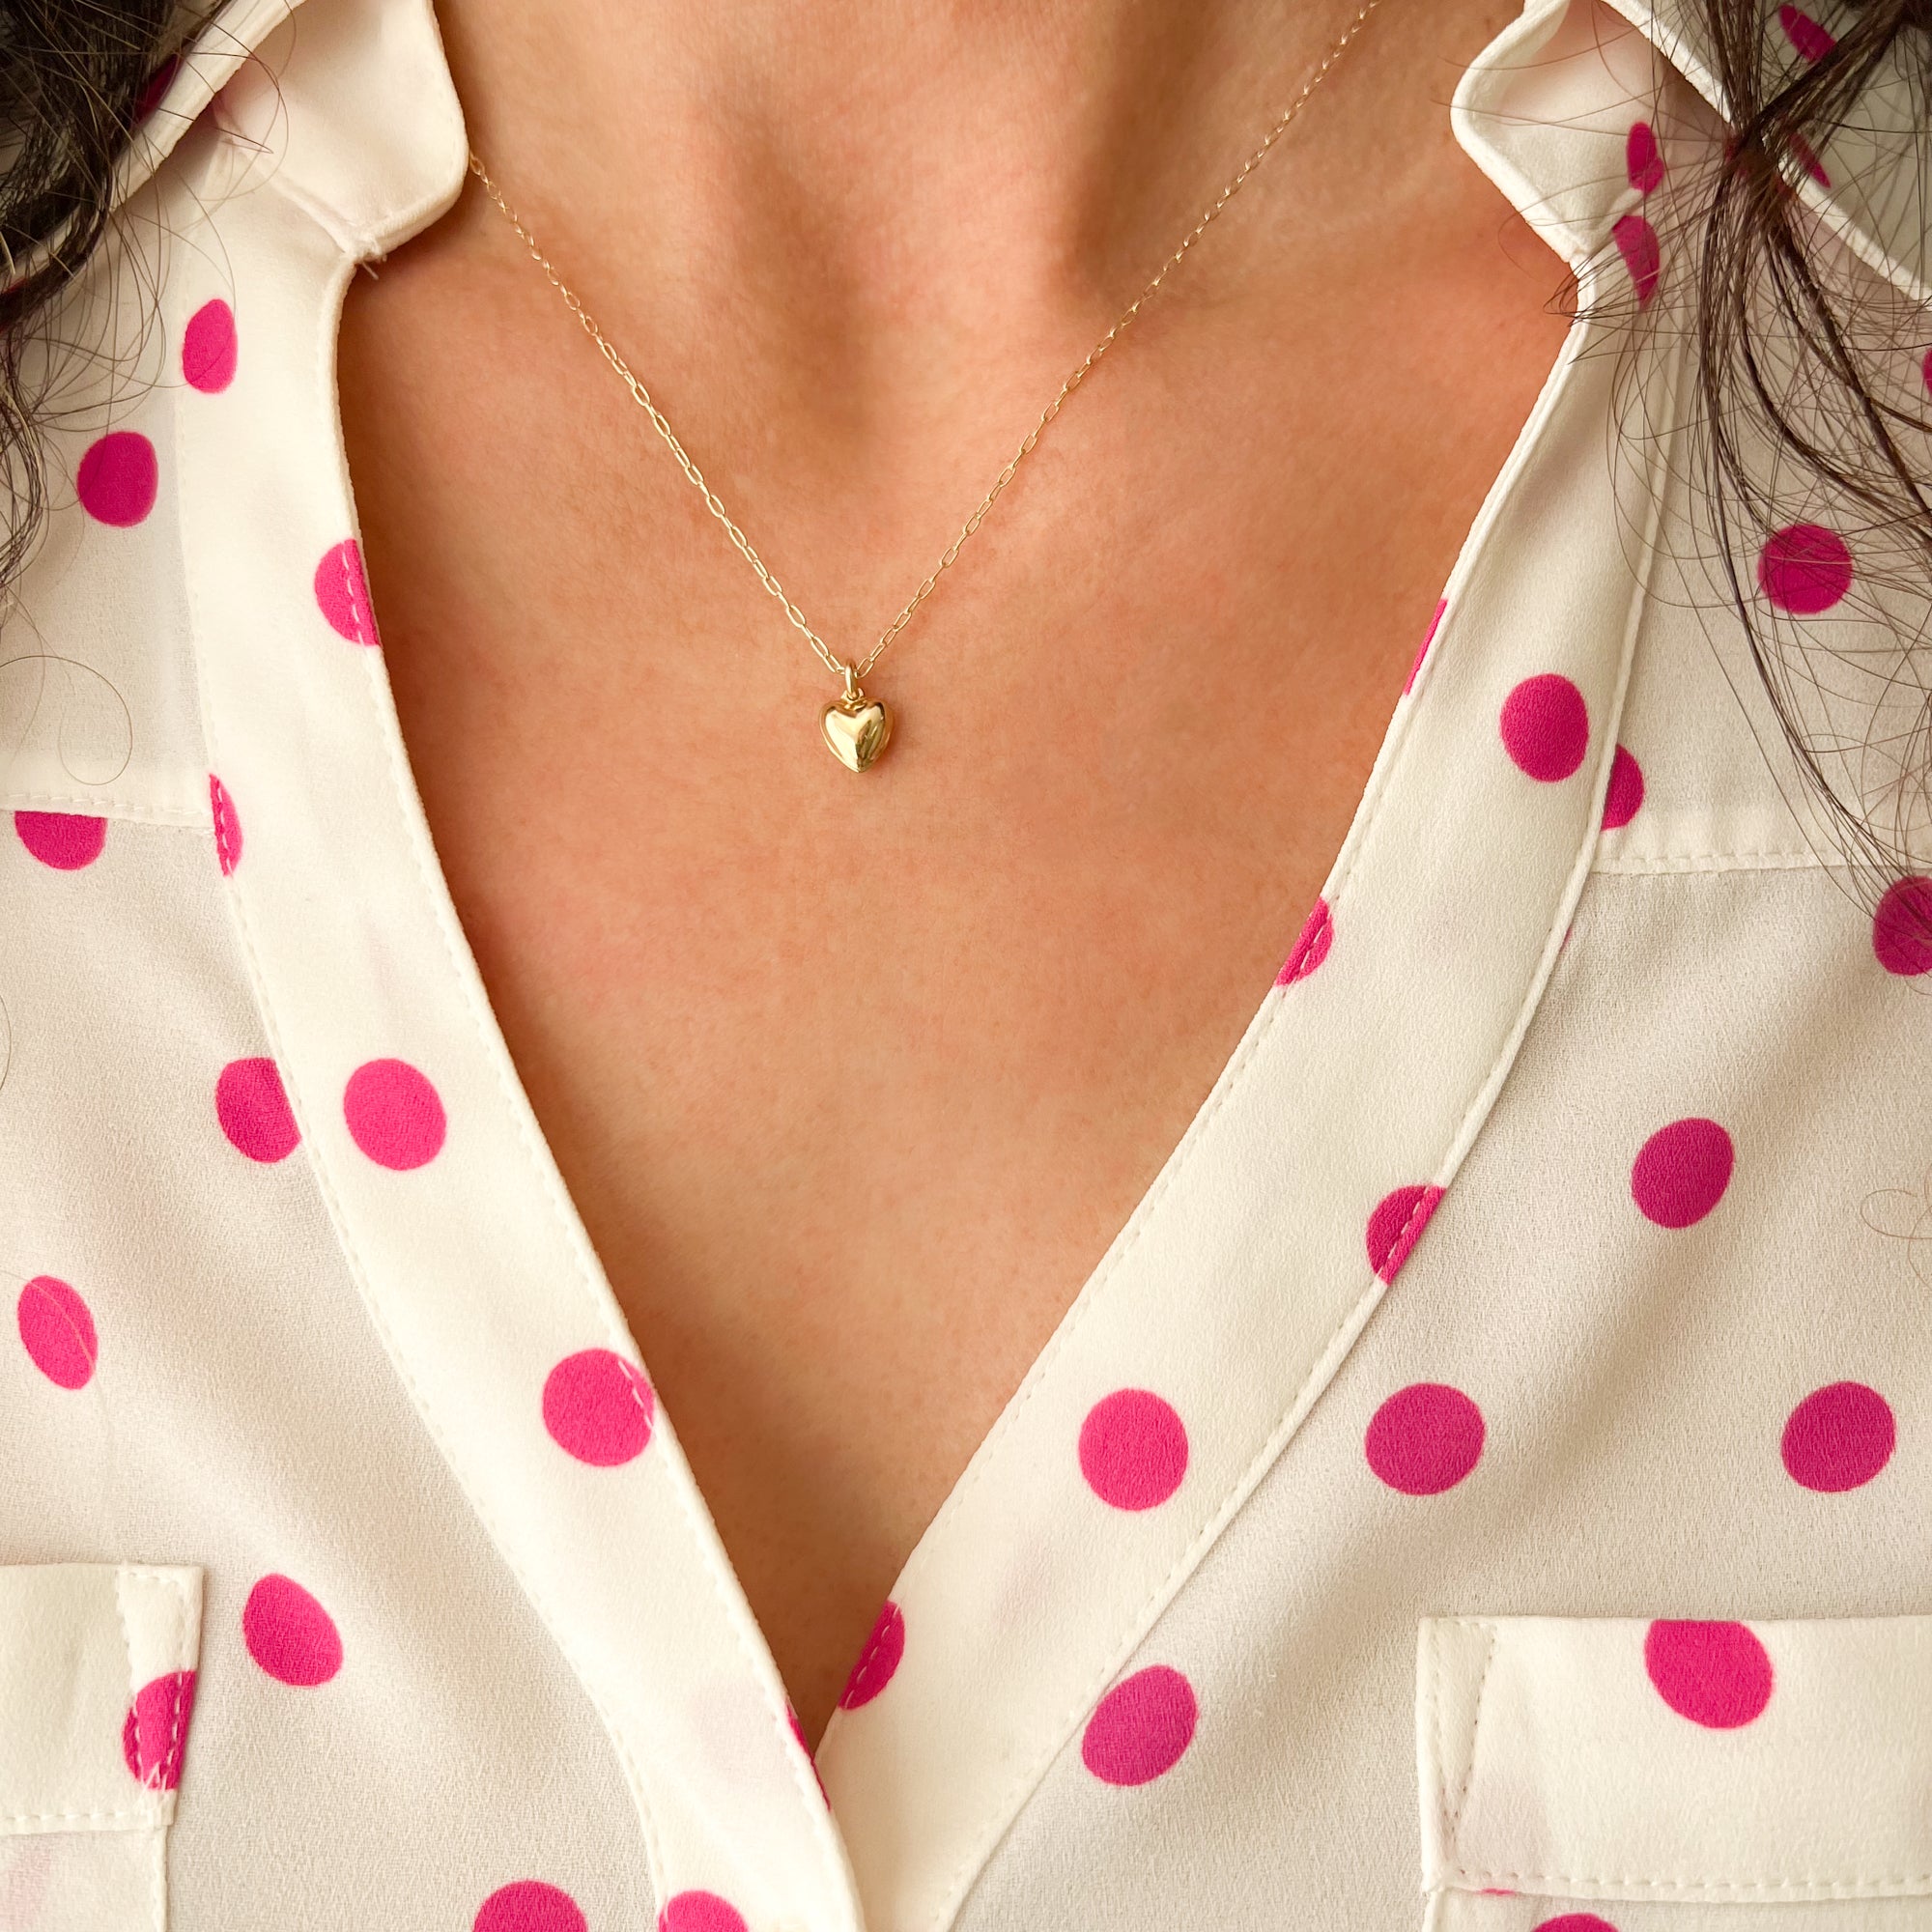 The Puffy Heart Necklace in Gold – Roxanne Assoulin